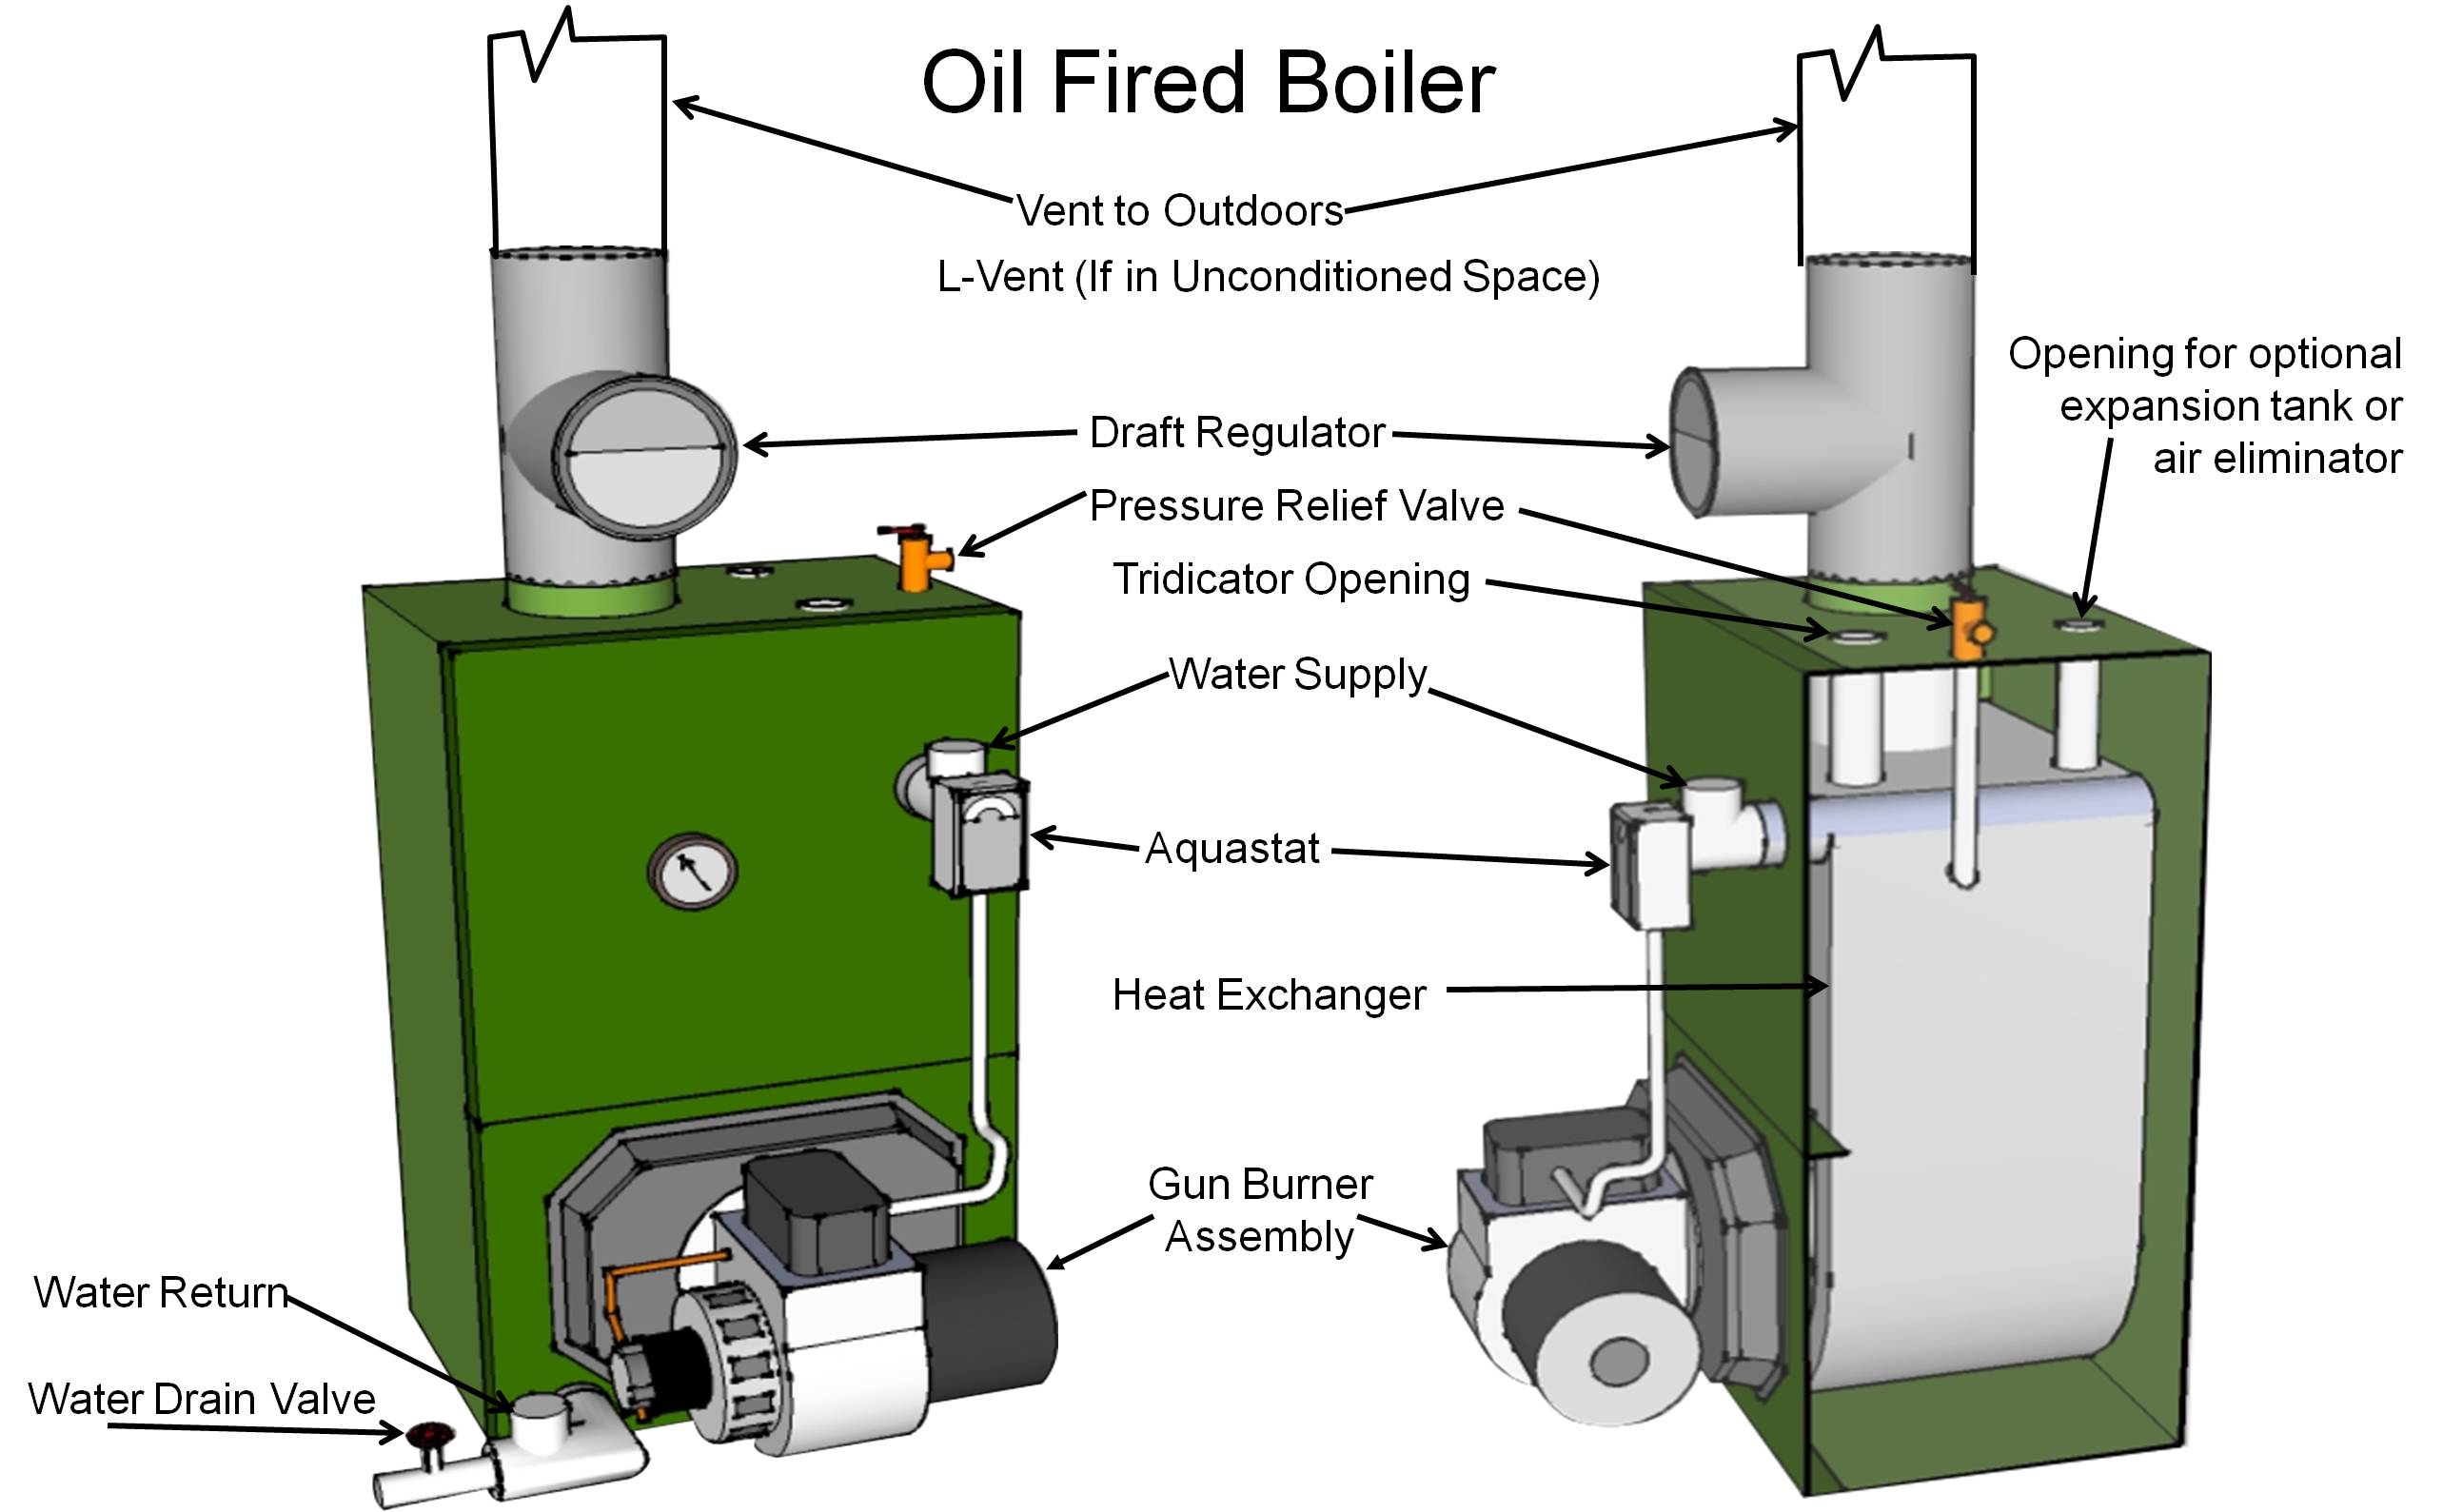 category-iii-oil-fired-sealed-combustion-boiler-with-the-burner